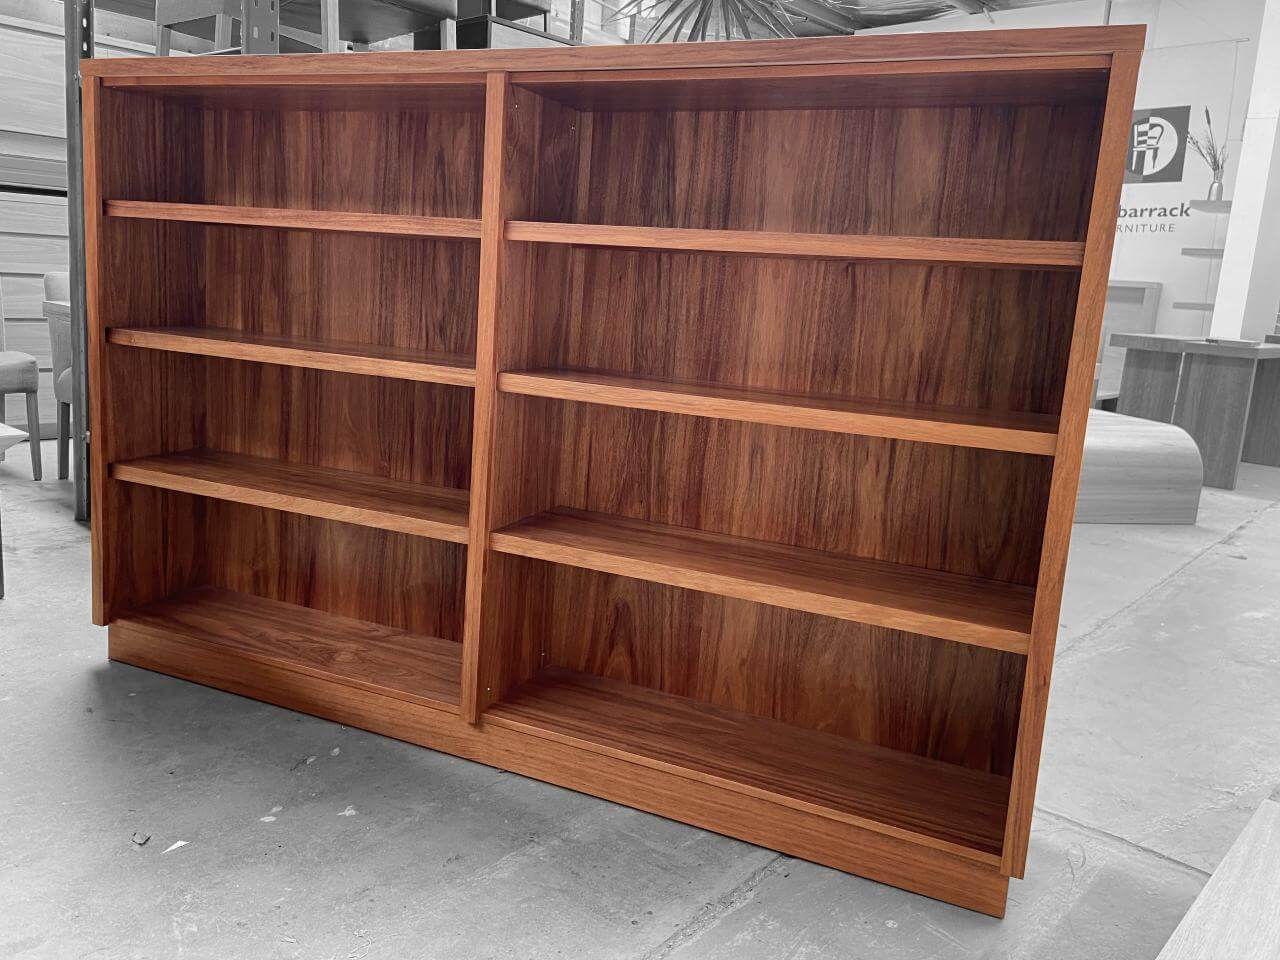 Ruby Bookcase Display Blackwood Timber Quality Furniture Made in Adelaide, South Australia